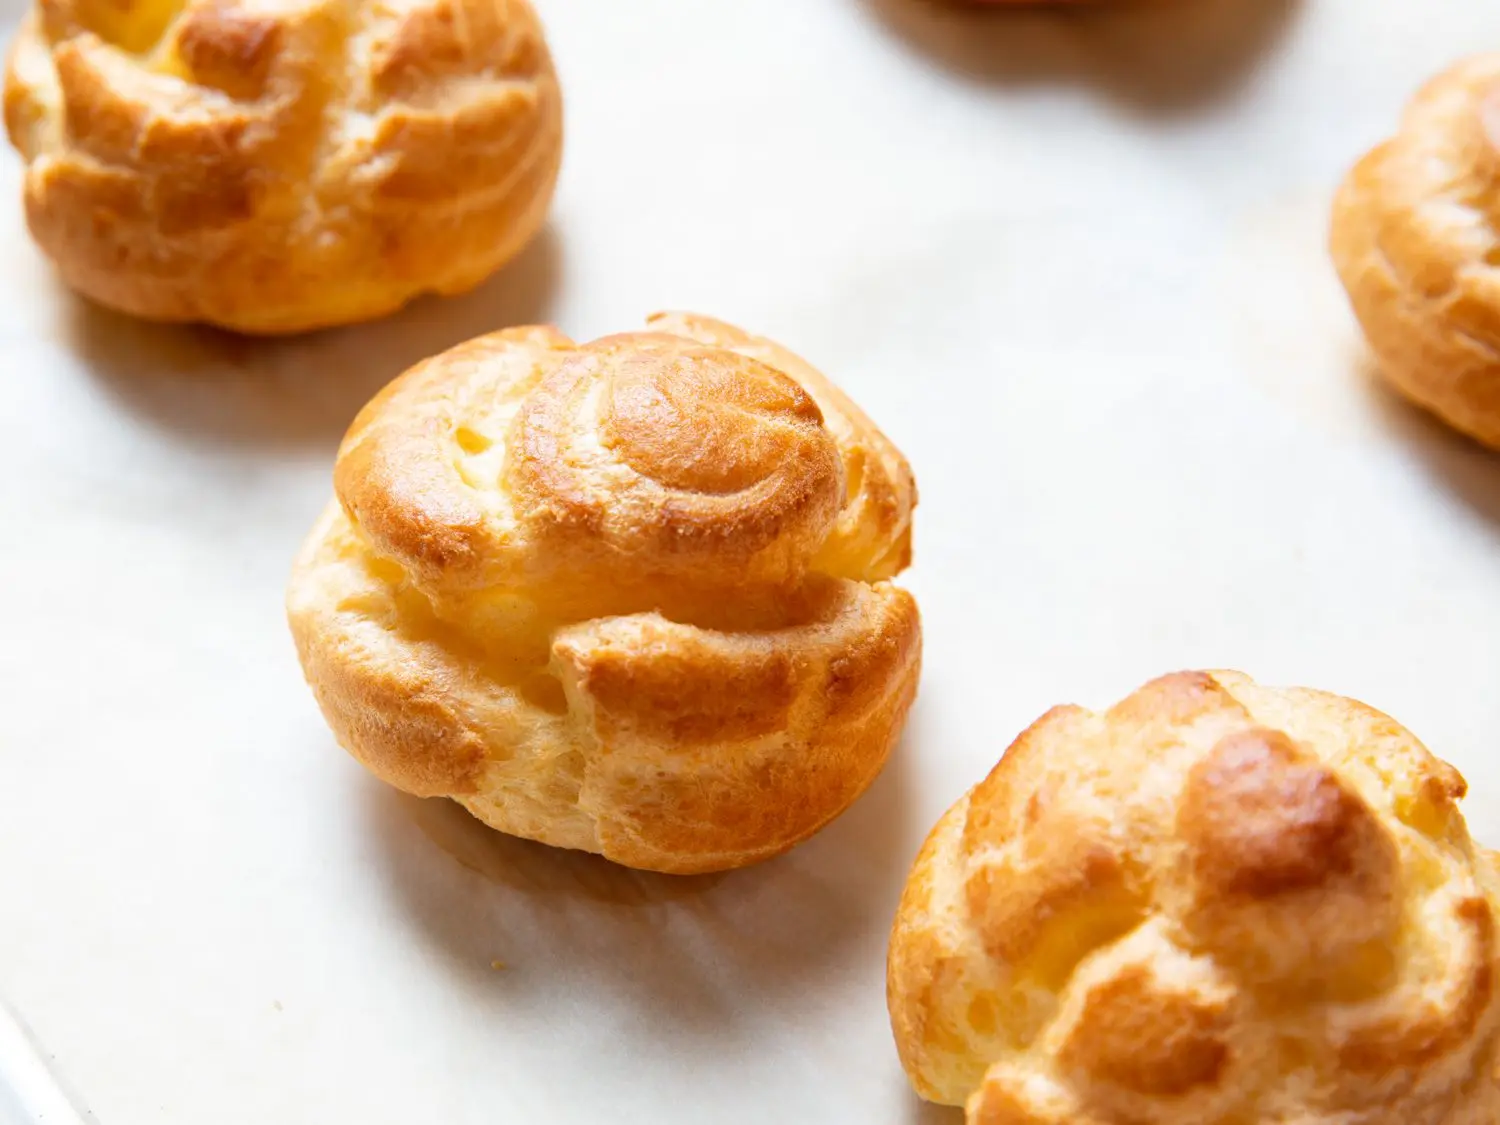 smoked salmon choux puffs - What is the secret to choux pastry